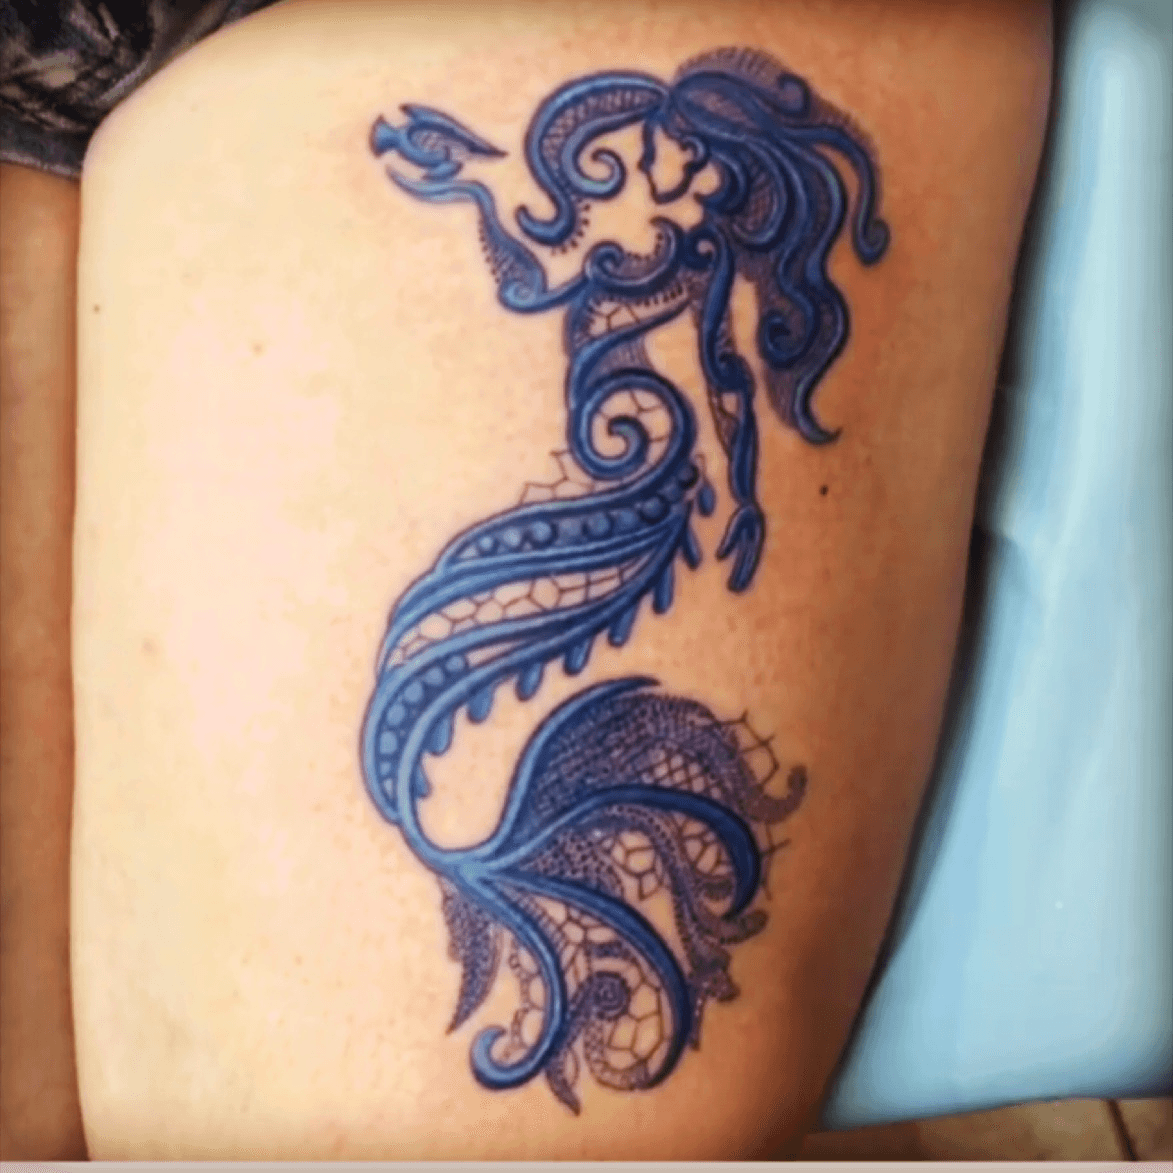 39 Captivating Mermaid Tattoos To Fall In Love With  Our Mindful Life